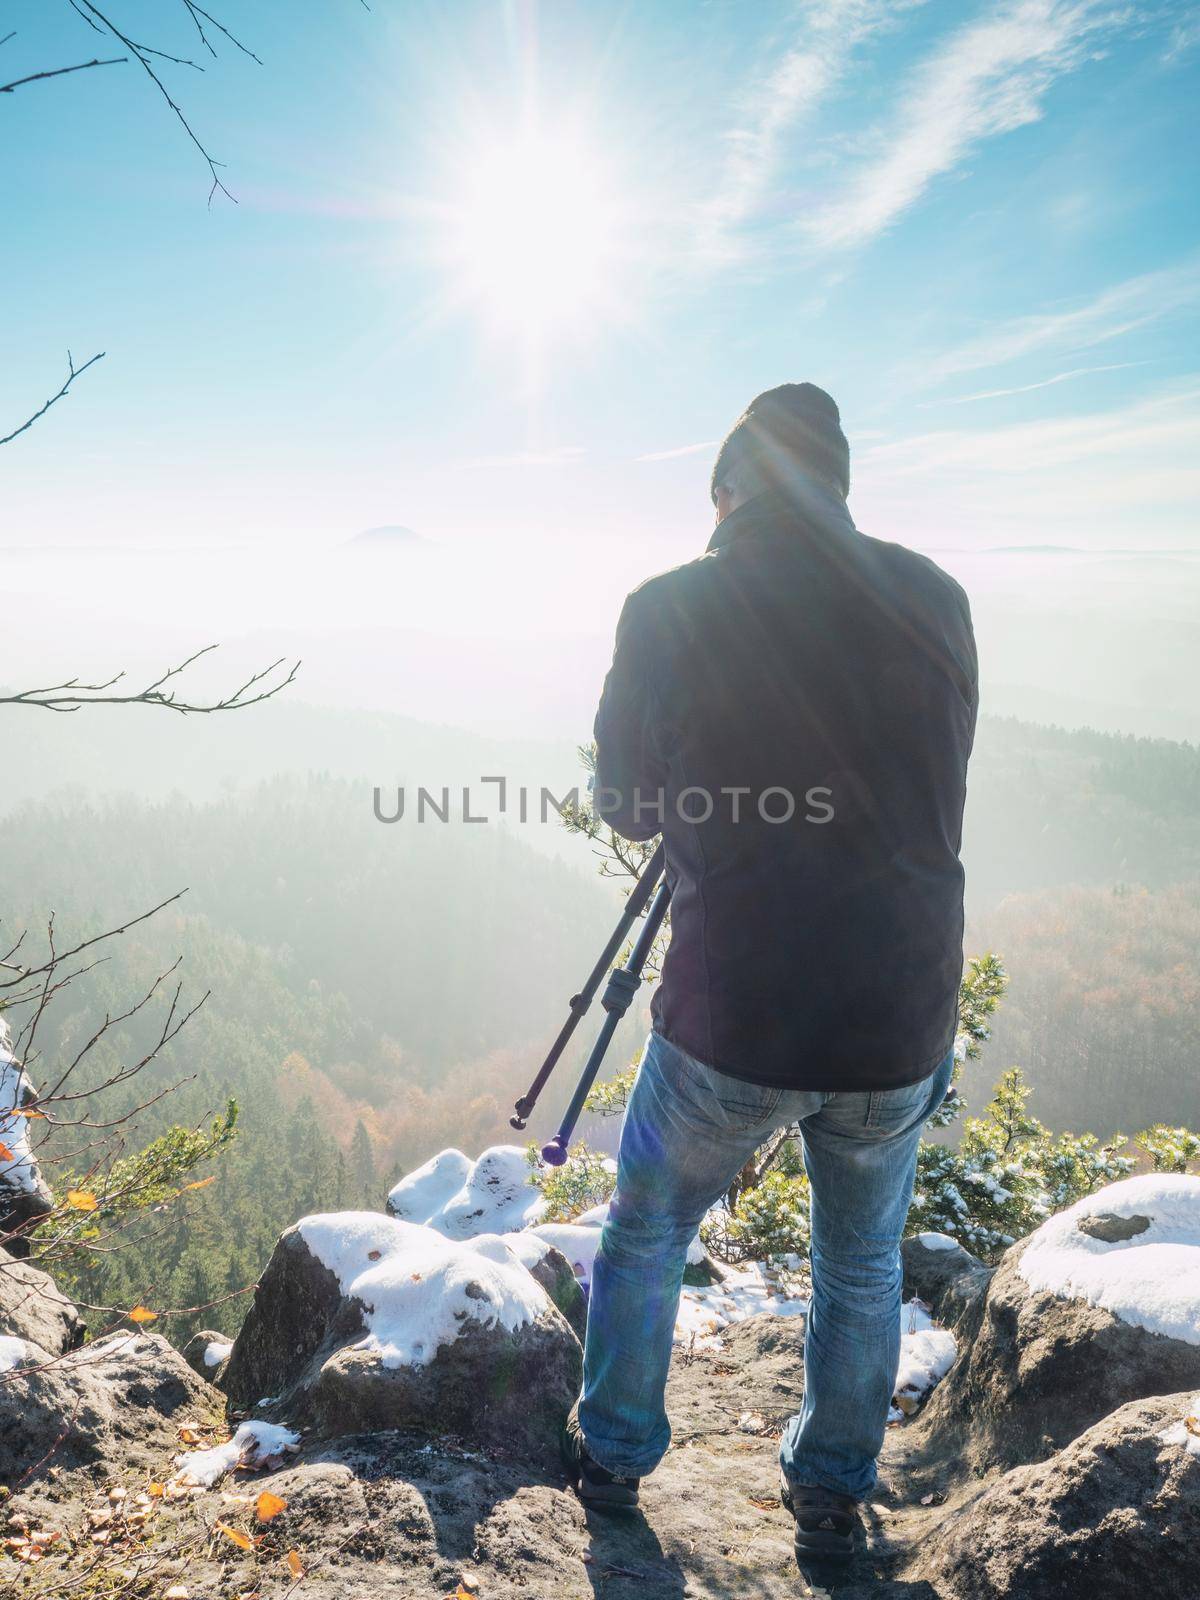 Nature photographer taking photos in the snowy mountains by rdonar2